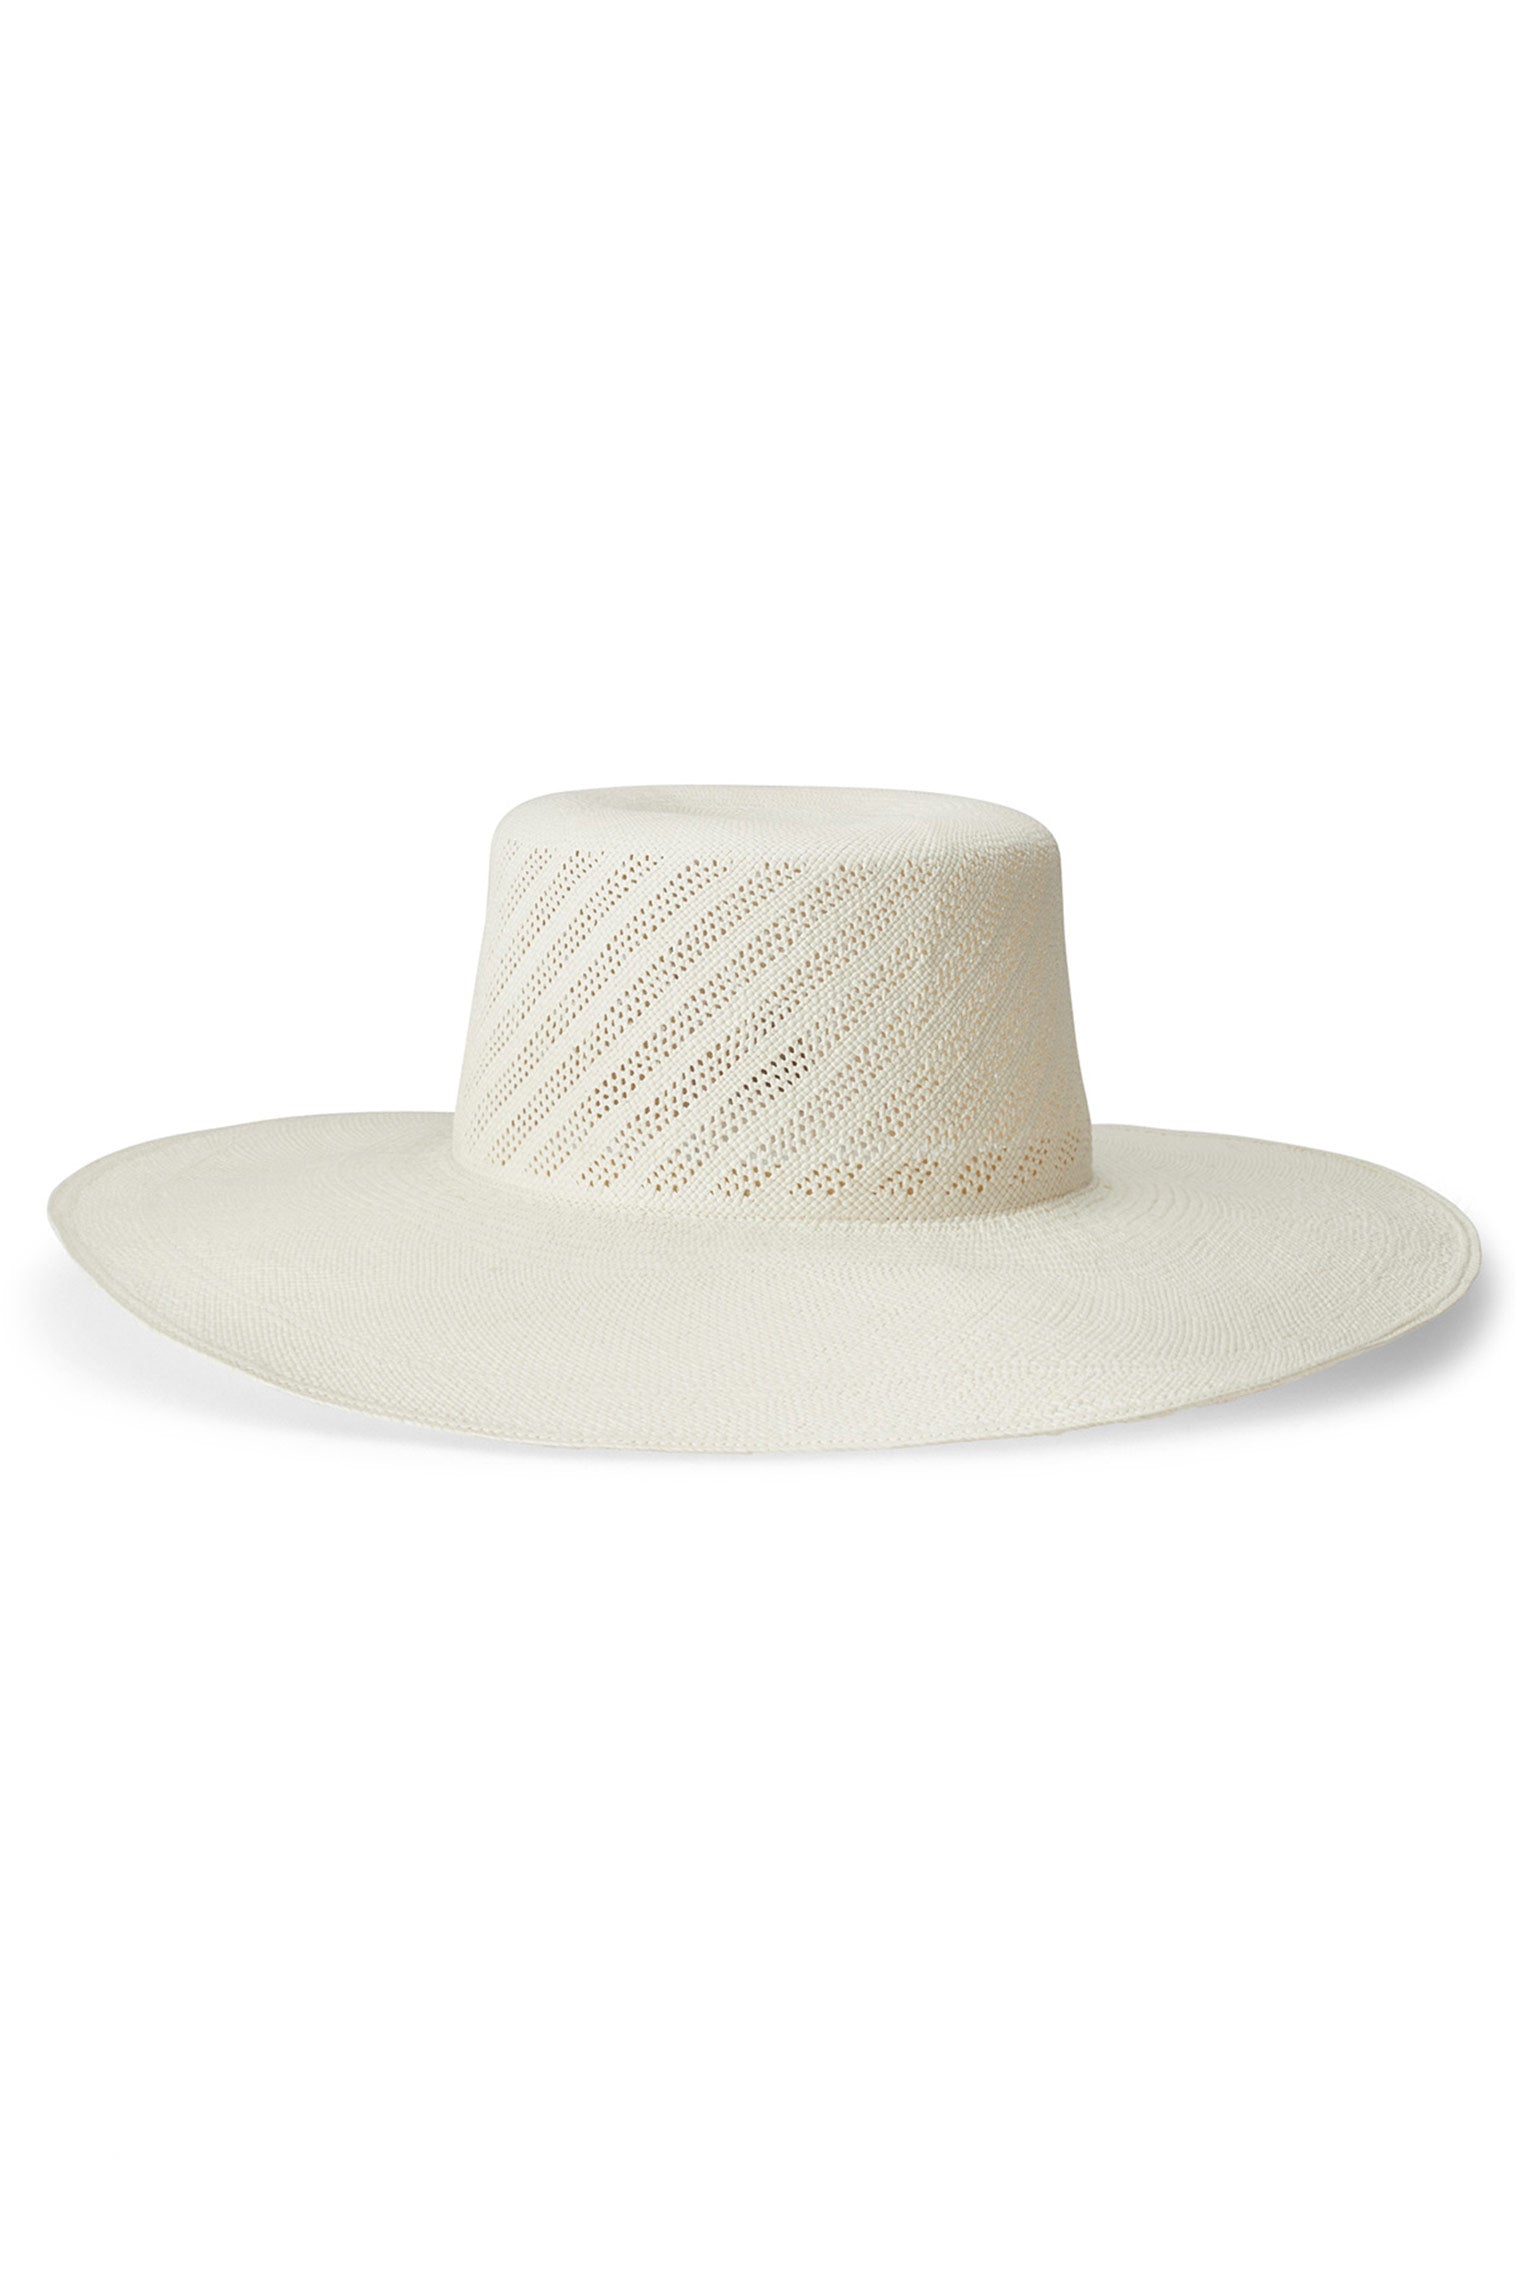 The Andrea - Panamas, Straw and Sun Hats for Women - Lock & Co. Hatters London UK